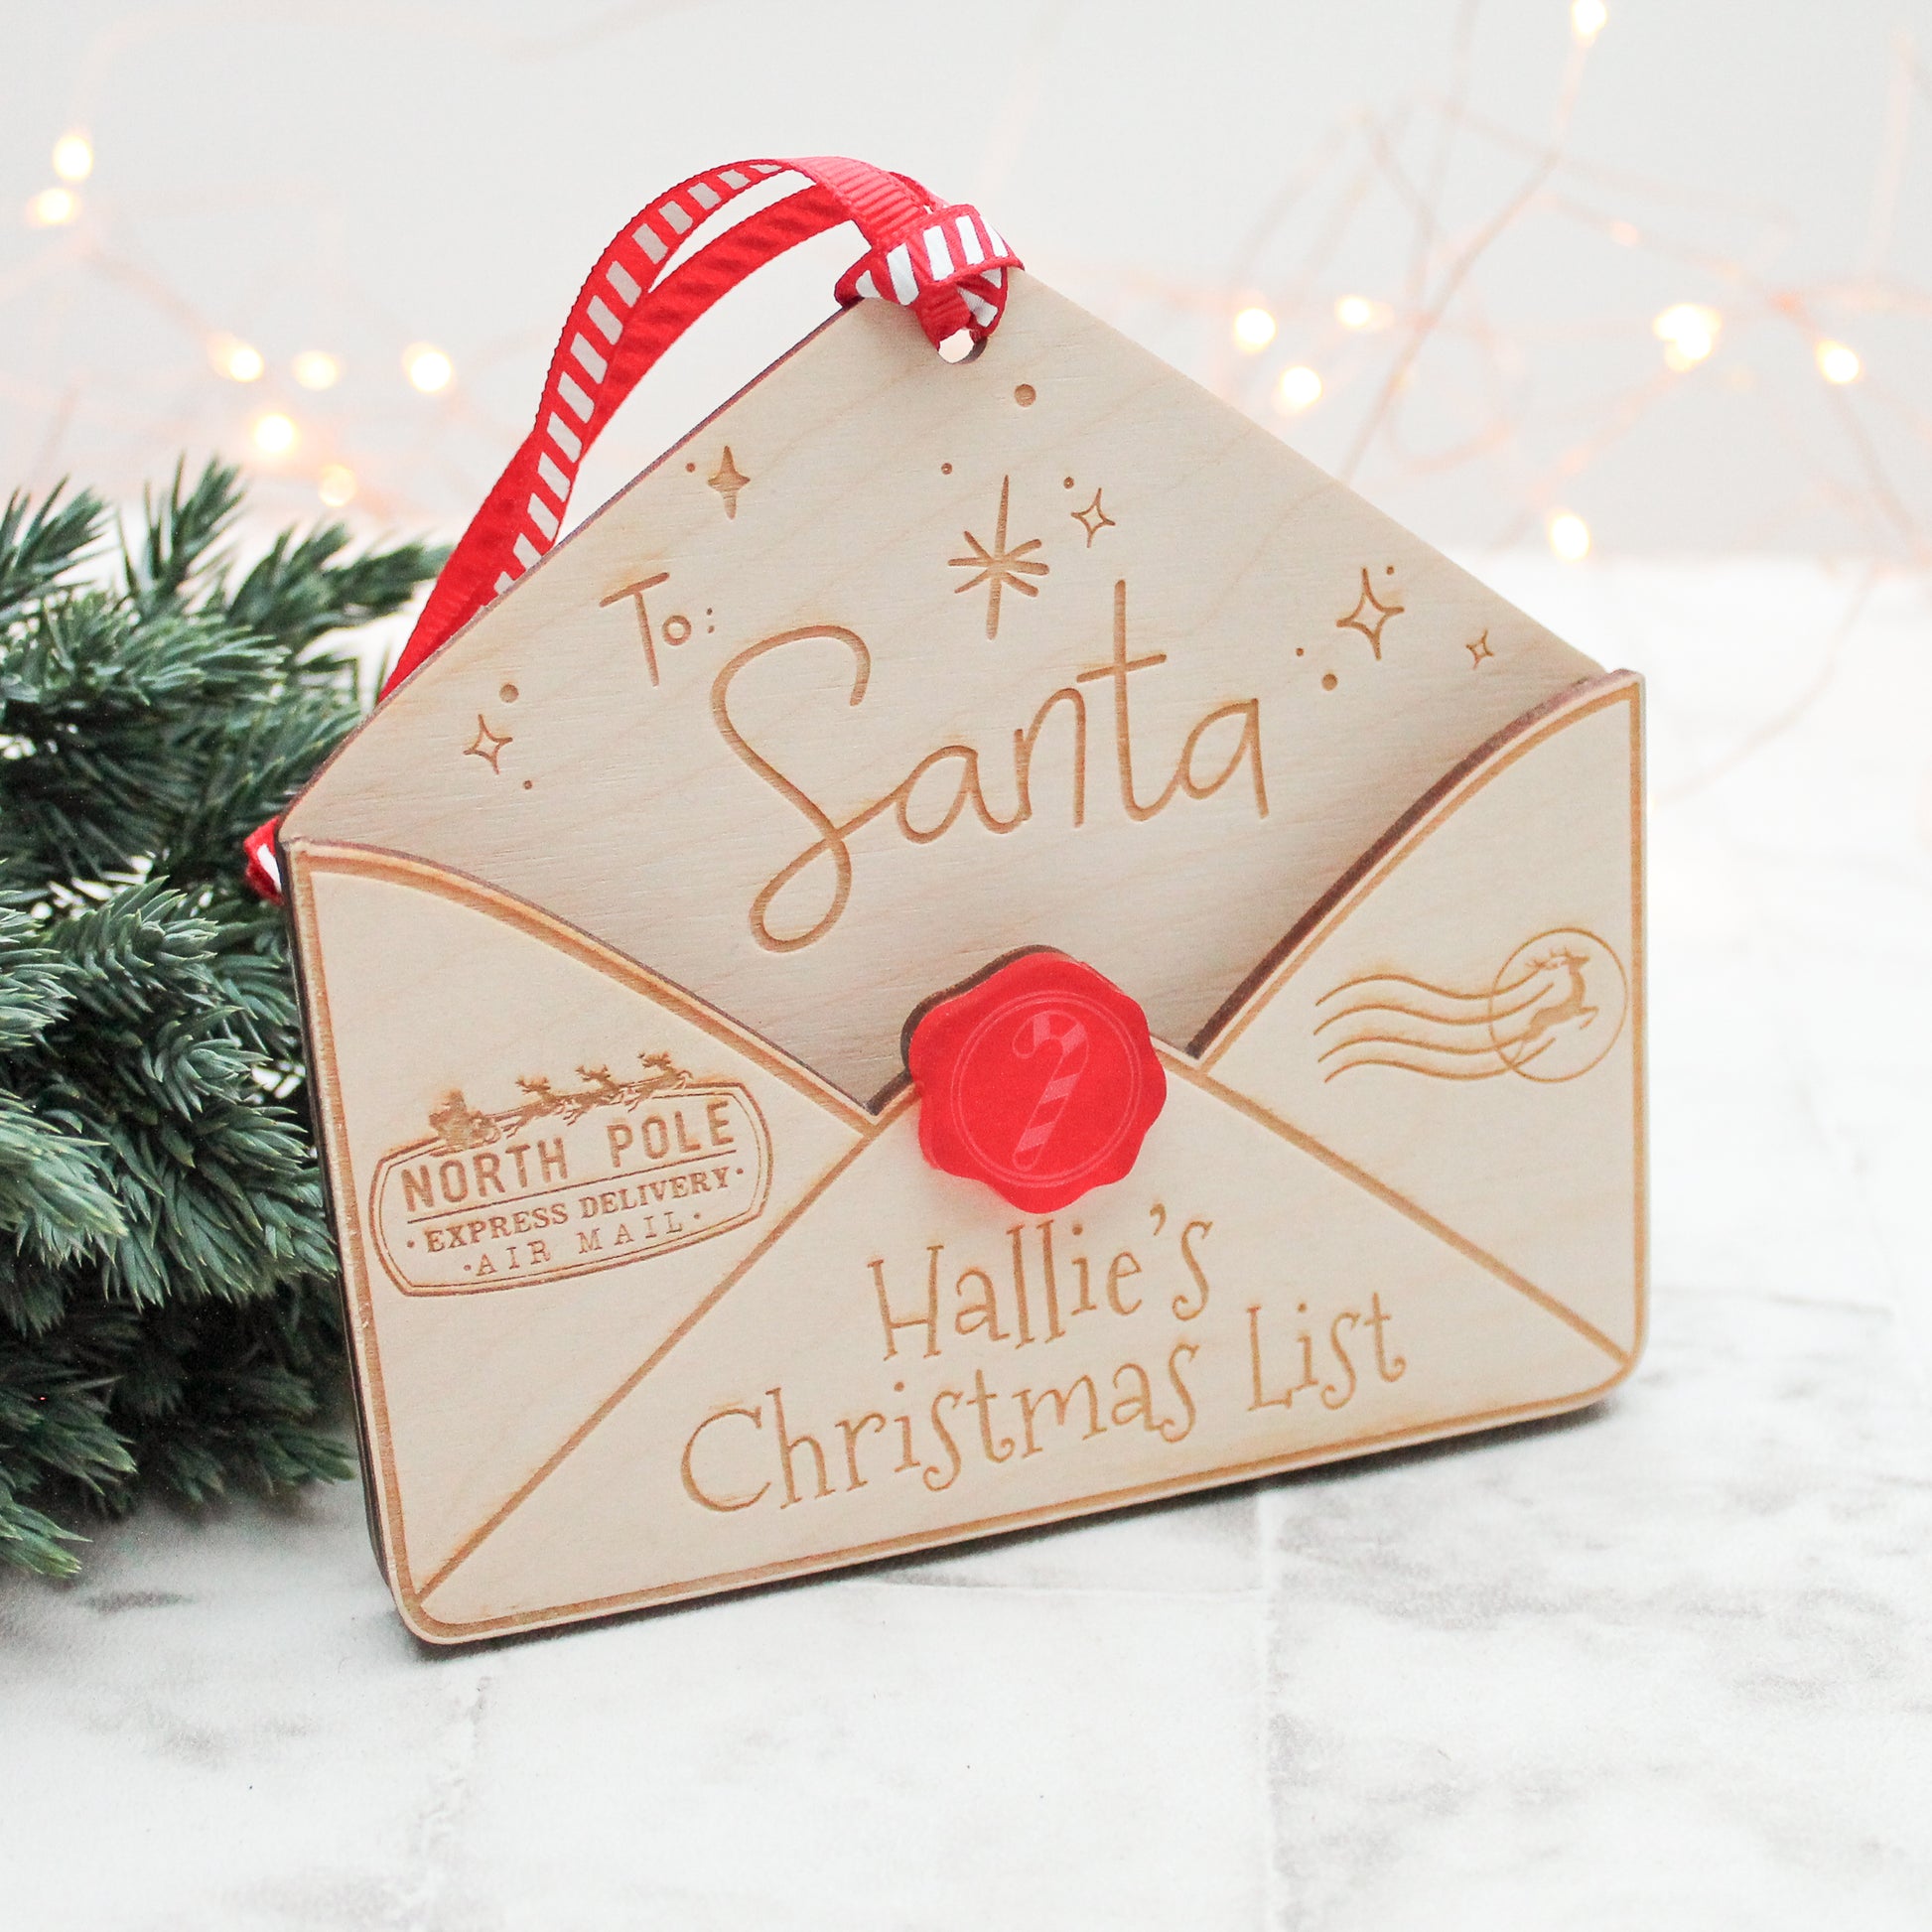 wooden envelope personalised with a name for putting in your letter to santa and hanging it up on the Christmas tree 